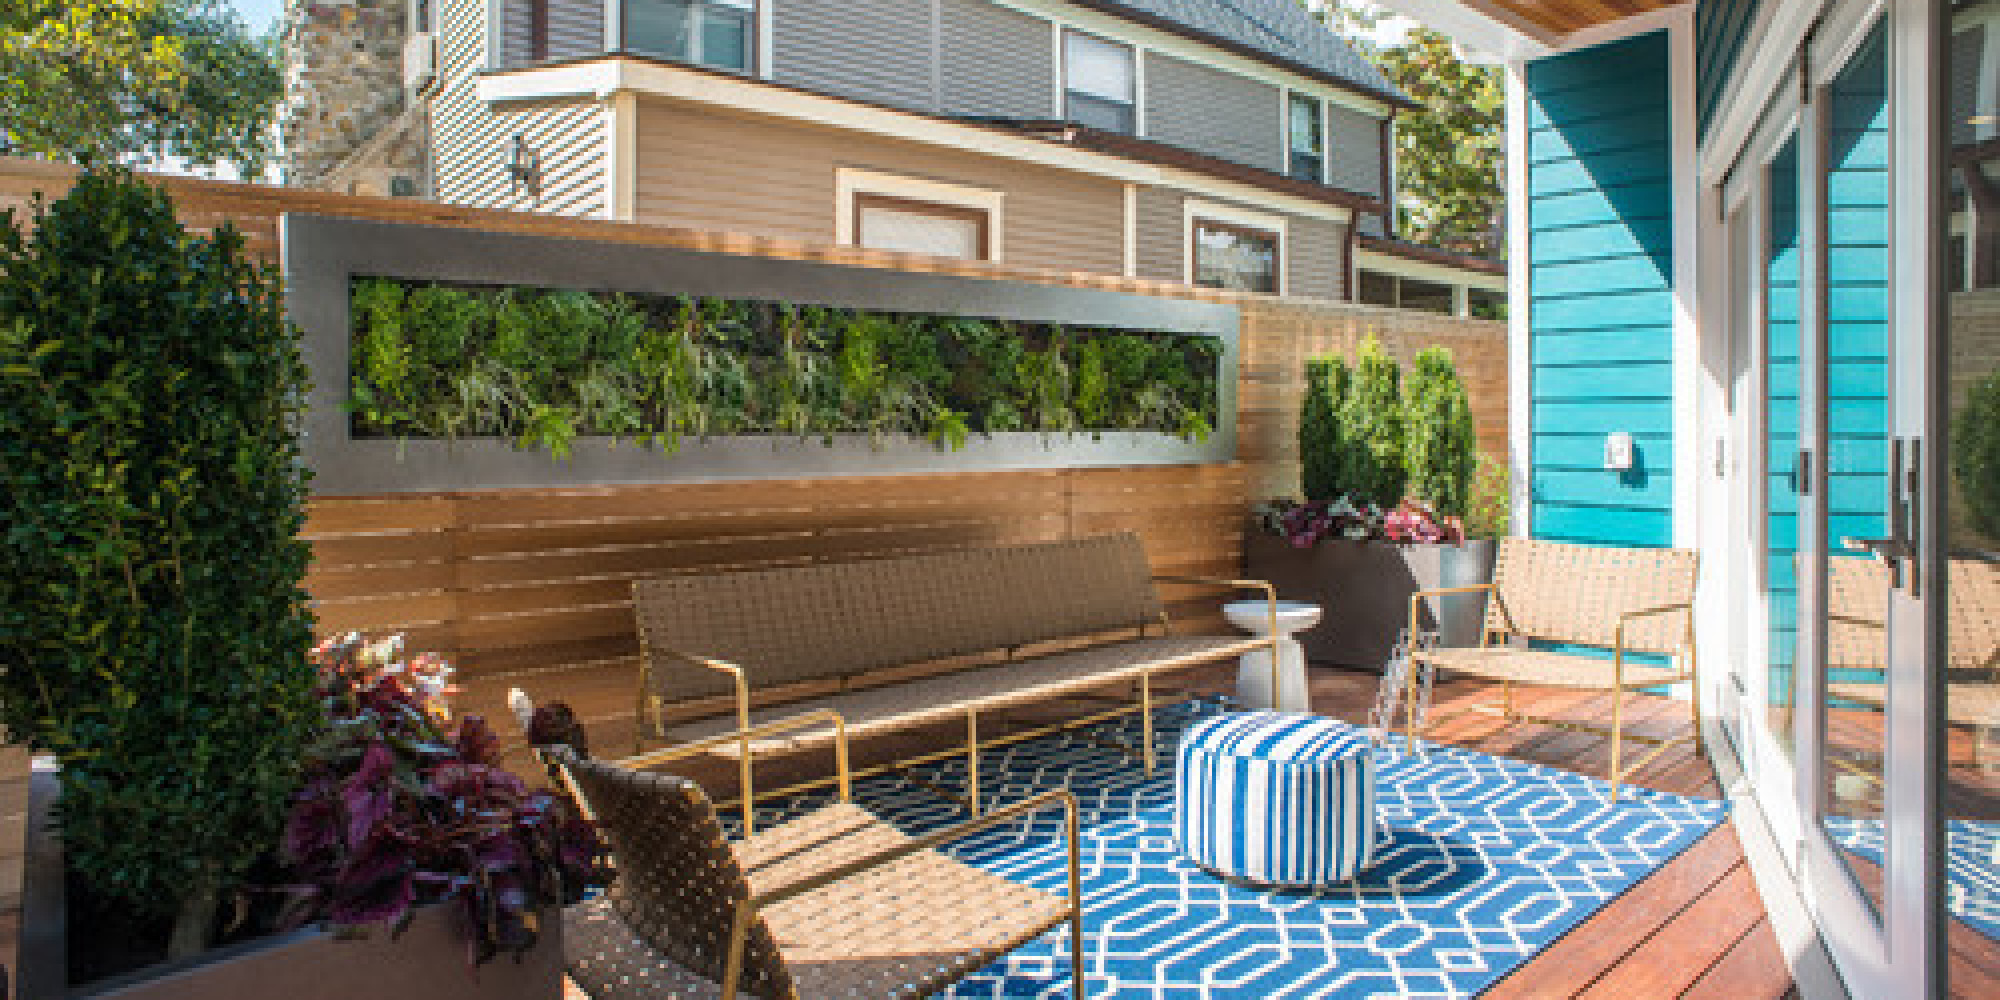 16 Ways to Get More from Your Small Backyard | HuffPost